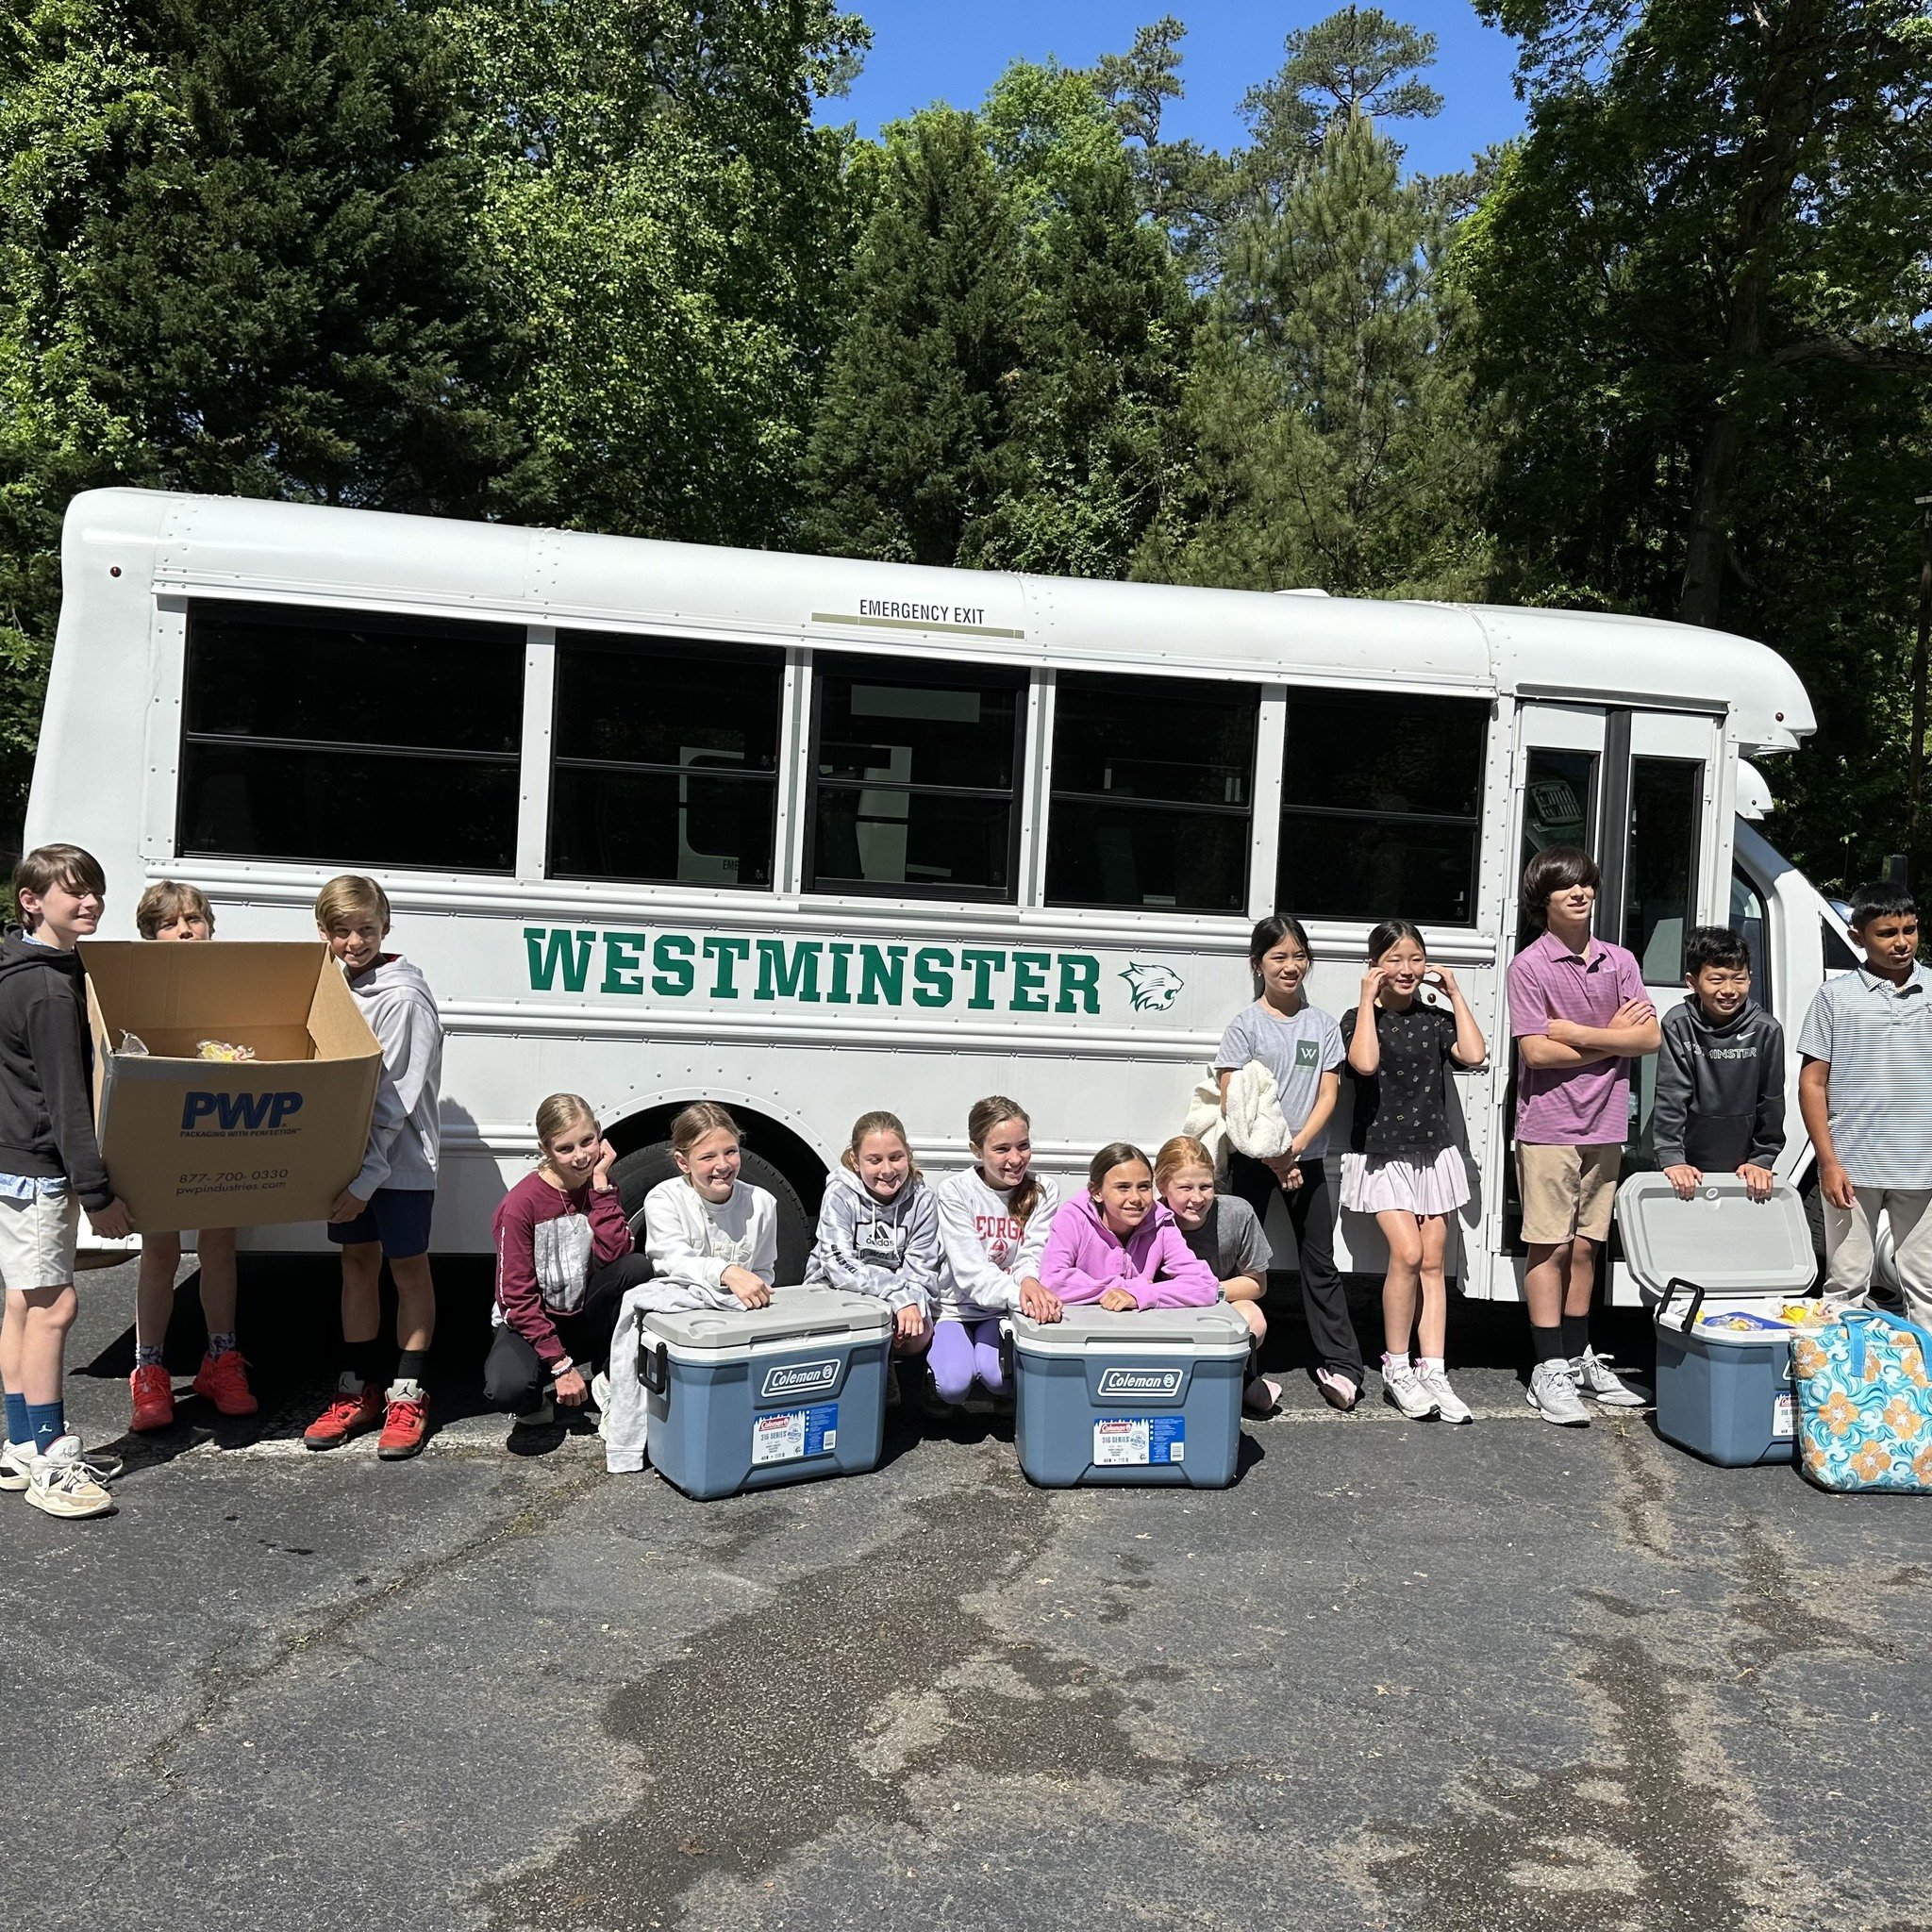 Westminster has partnered their 5th graders with a senior adult community to make sandwiches. Together, they will make over 1,500 sandwiches! It is inspiring to see the youth and elderly together doing something good for the community. ❤ @westminster